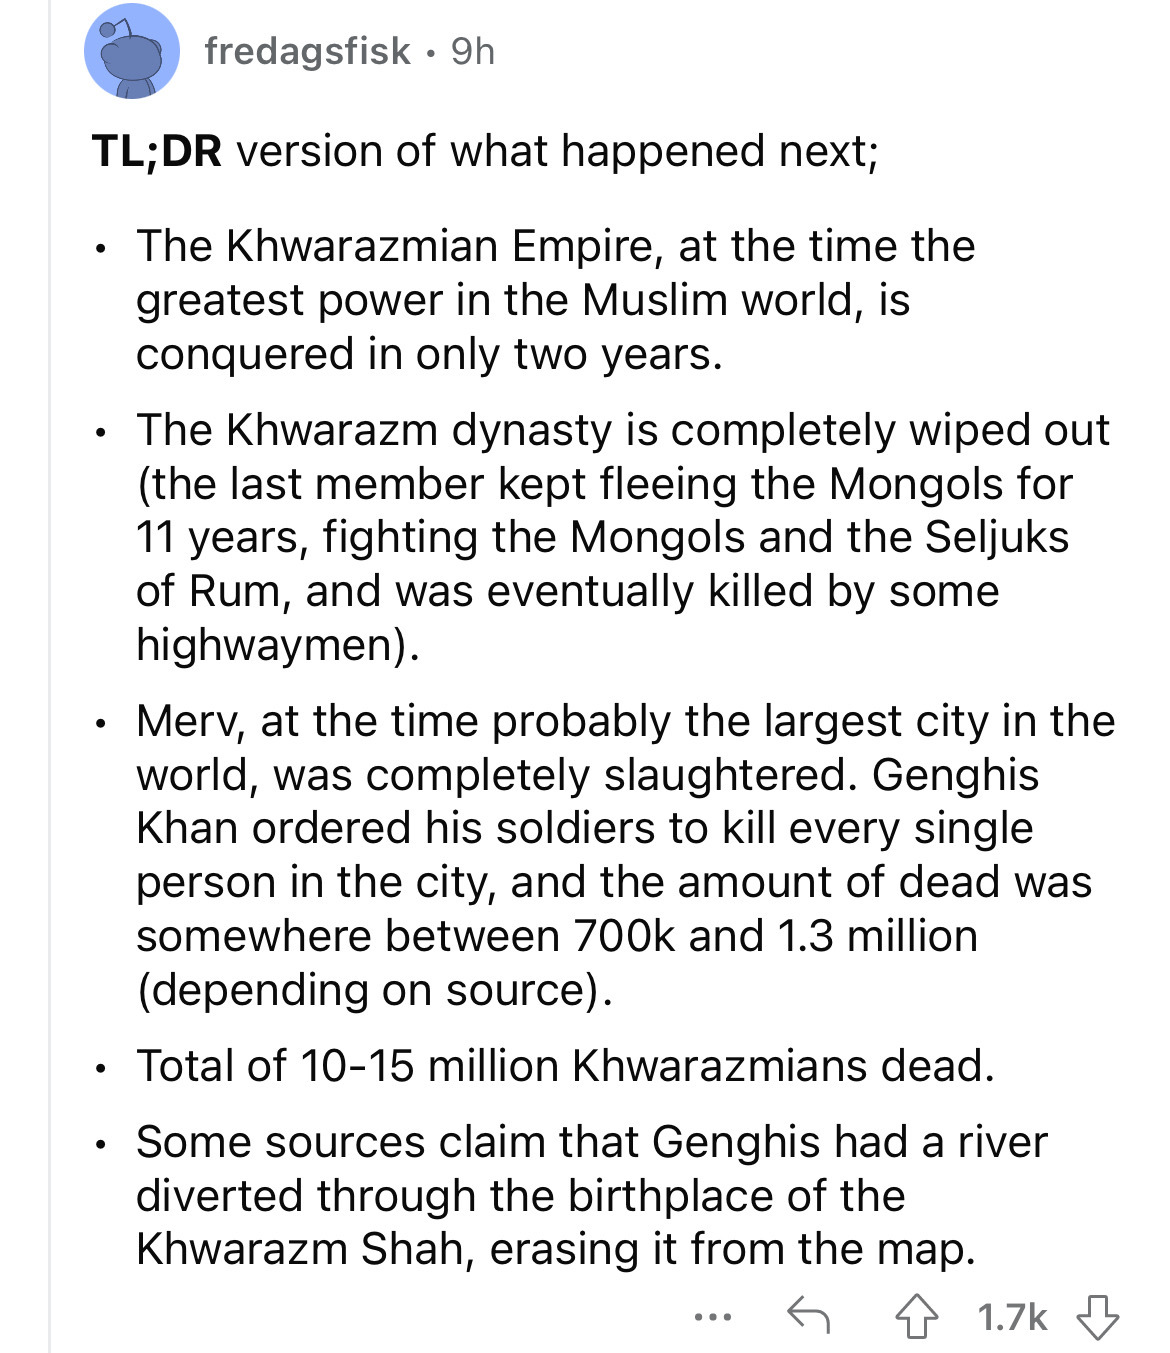 angle - fredagsfisk 9h Tl;Dr version of what happened next; The Khwarazmian Empire, at the time the greatest power in the Muslim world, is conquered in only two years. The Khwarazm dynasty is completely wiped out the last member kept fleeing the Mongols f